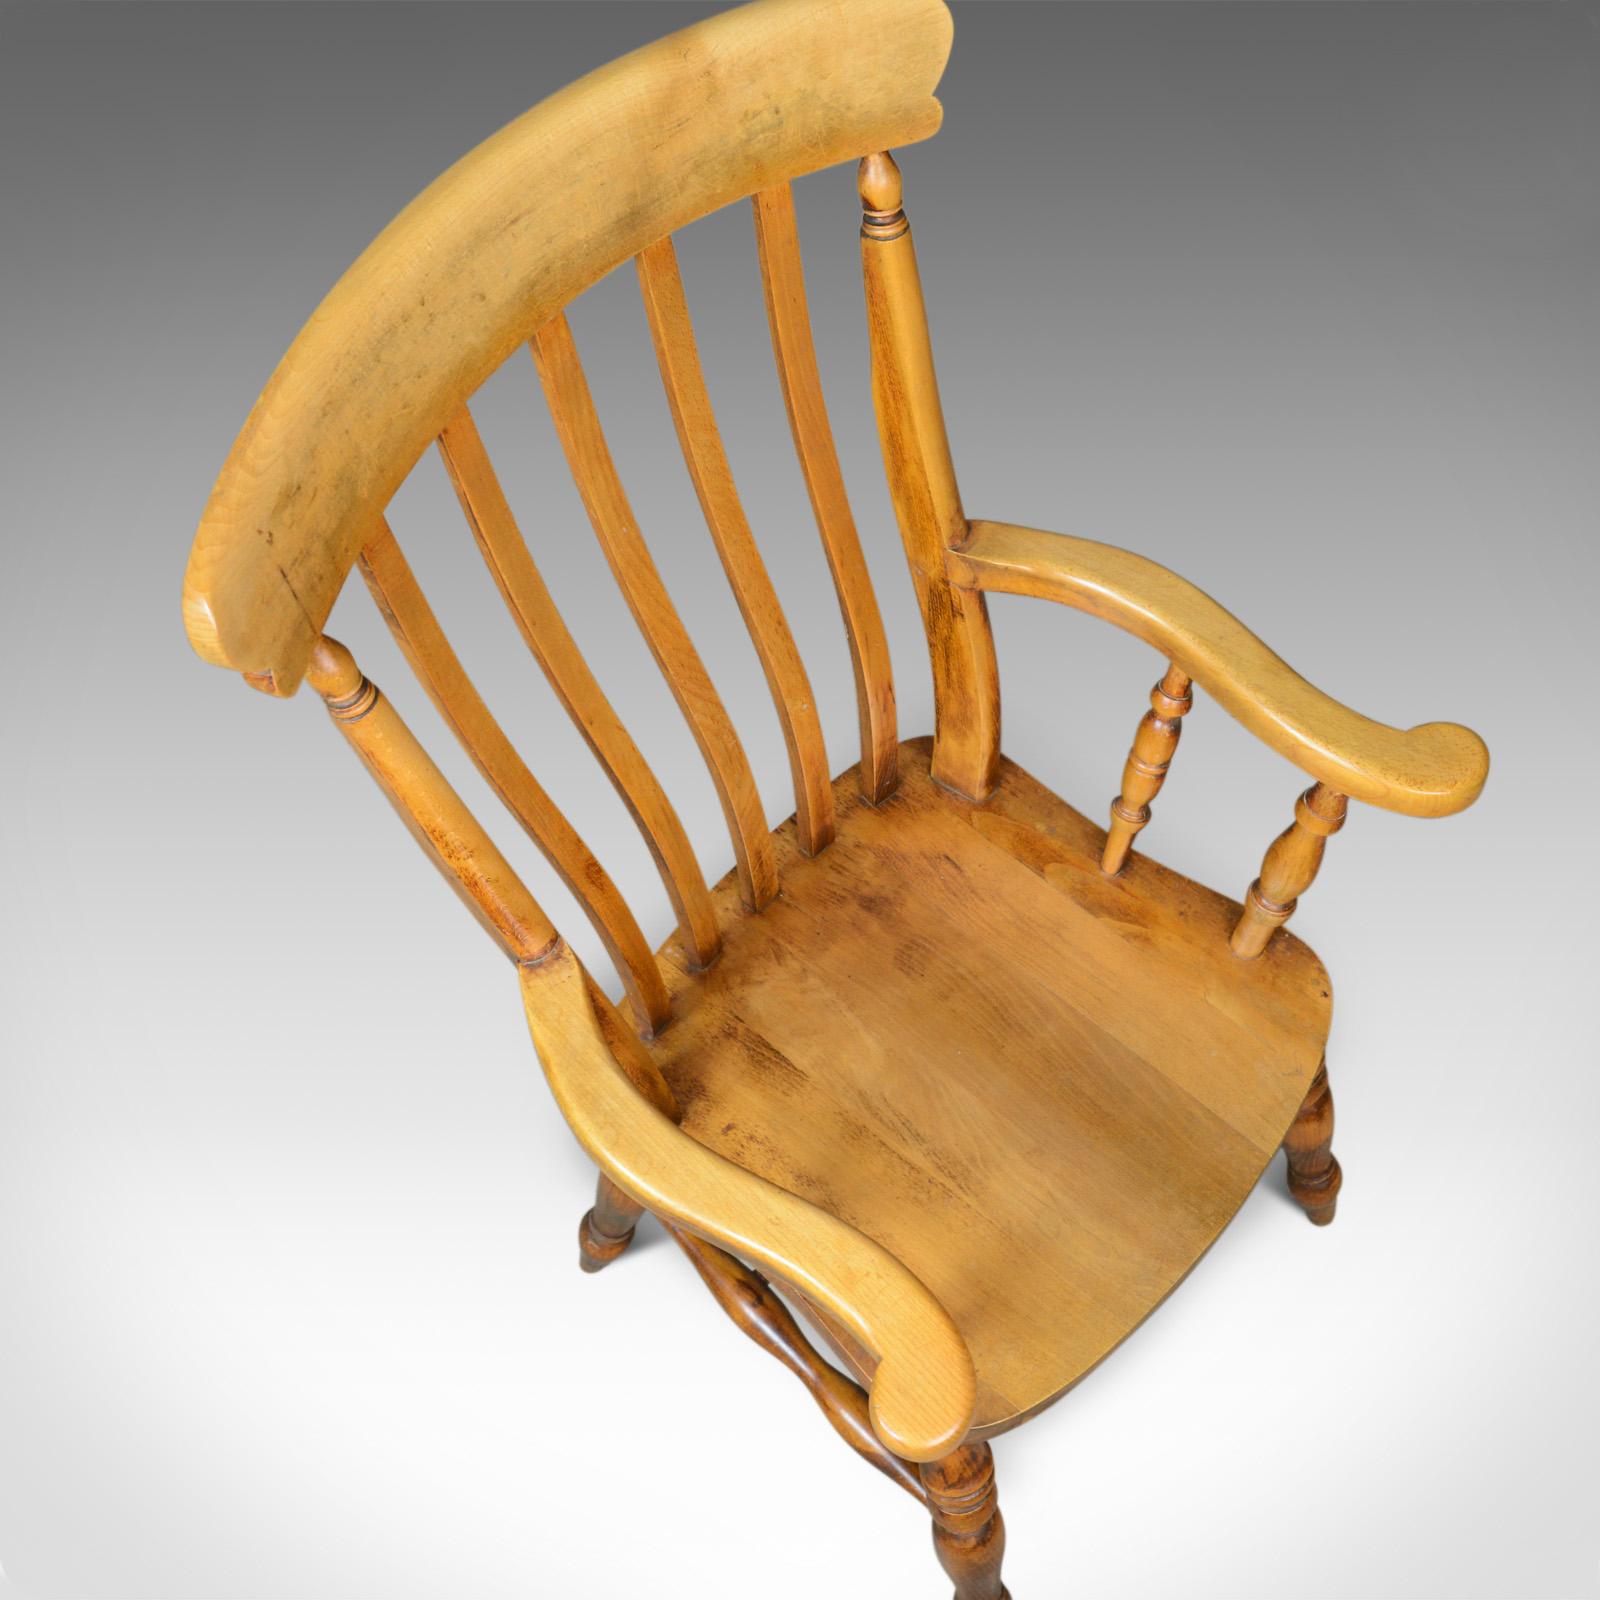 Beech Antique Elbow Chair, English, Country Kitchen, Windsor Armchair